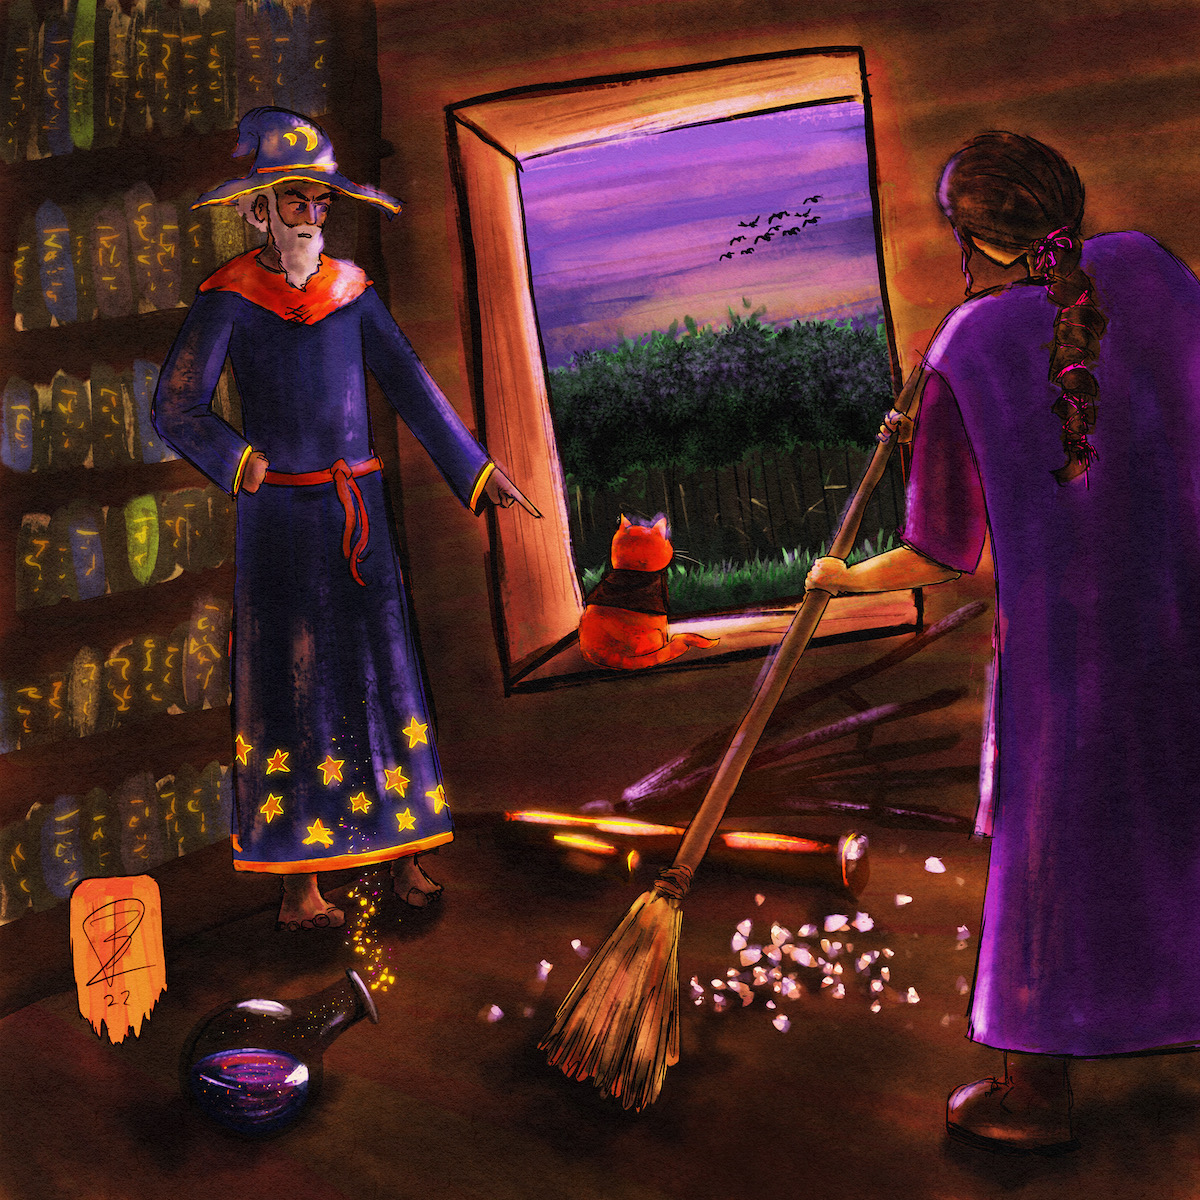 A wizard with stars on his robe and moons on his hat is standing in front of a bookshelf. He’s pointing at an orange cat with a little cape on, who has his back turned and is staring out the window at some birds. The sun is setting over a distant forest. A telescope has fallen over, and there’s glass everywhere. In the foreground, a woman with a braid and a purple cape is sweeping up the mess with a long-handled broom.